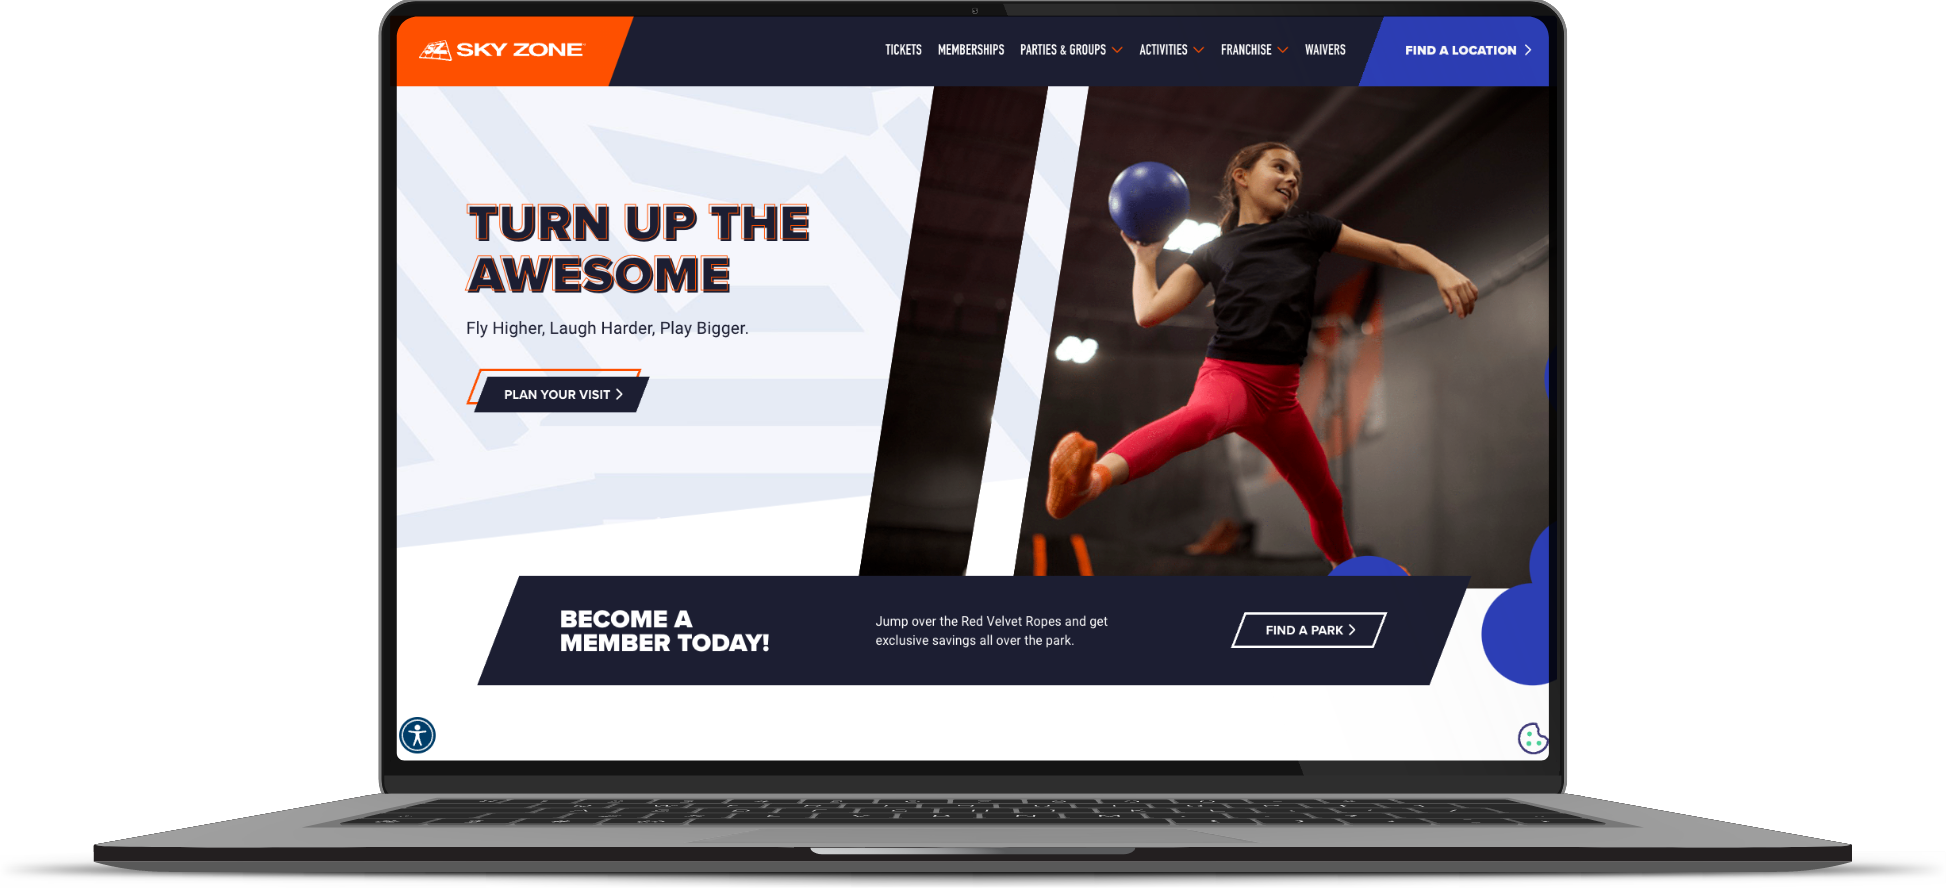 Sky Zone home page on a laptop